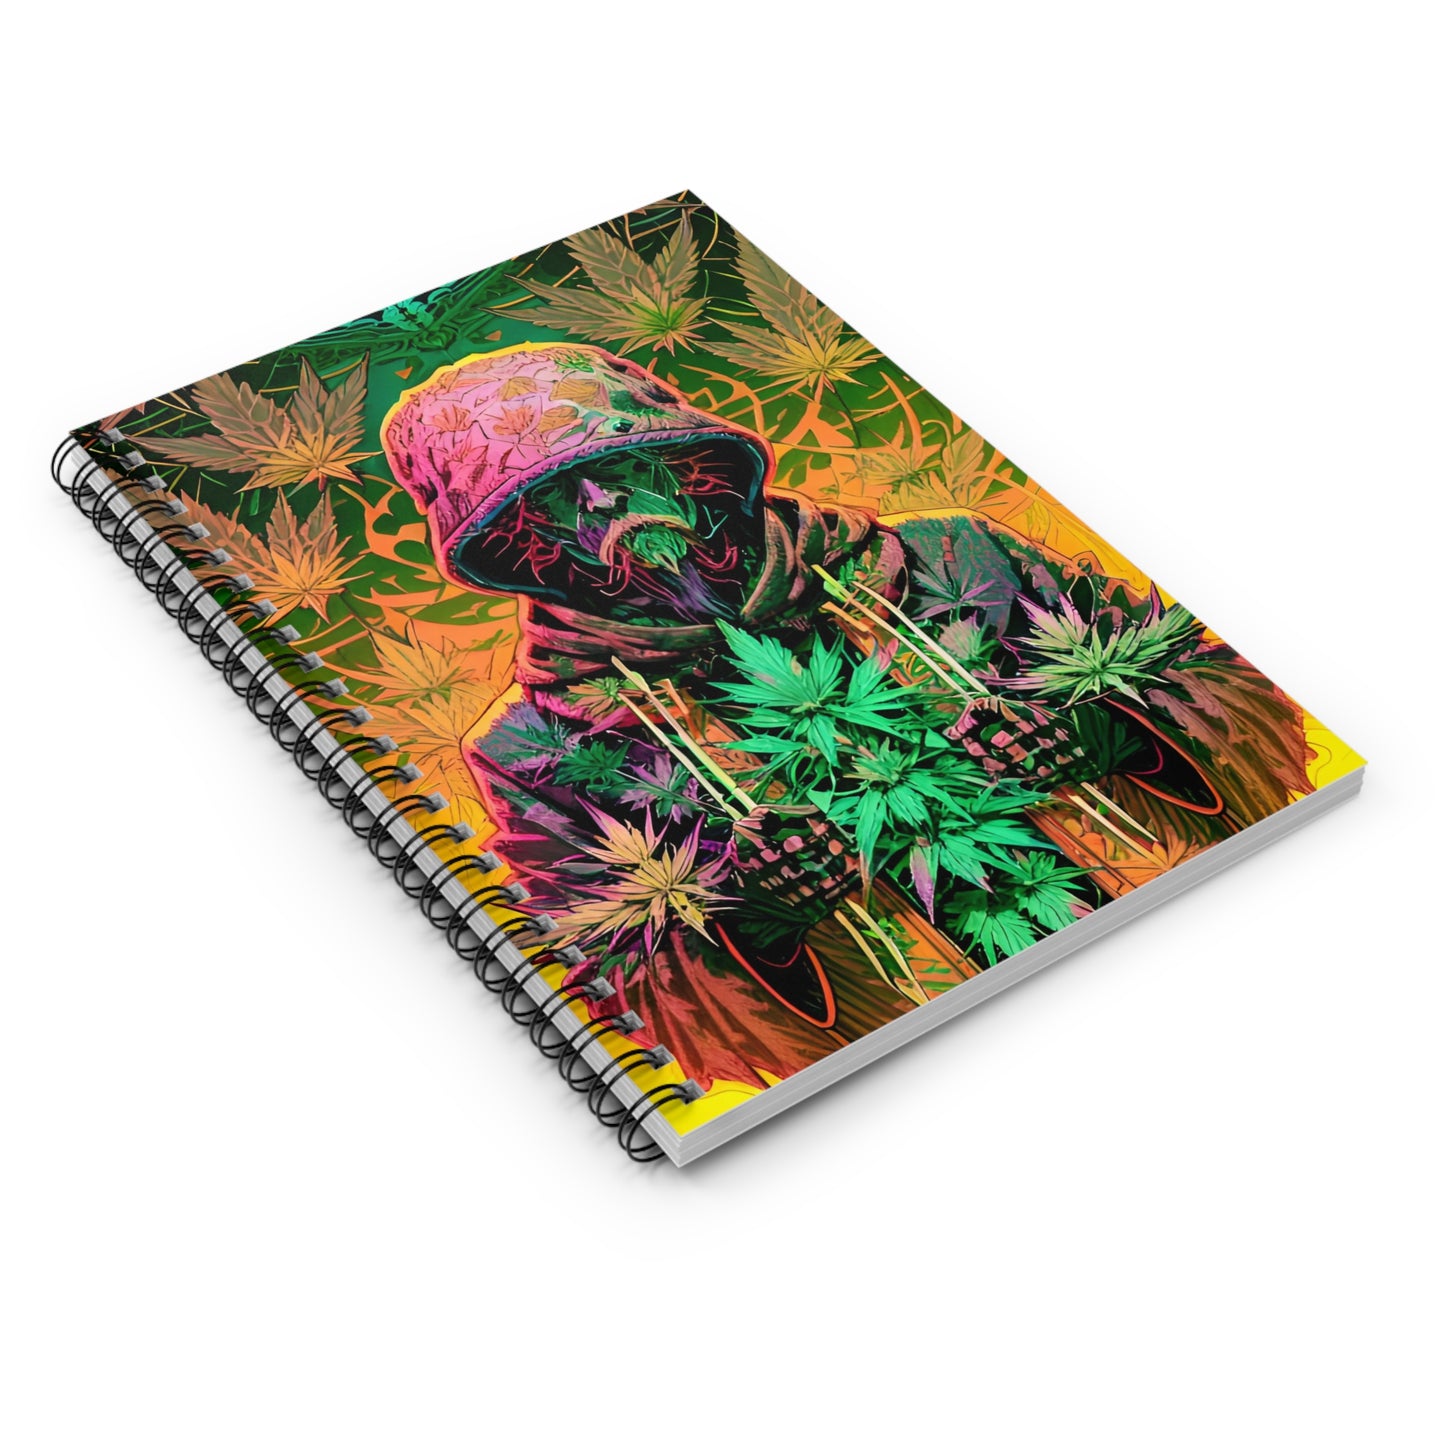 Weed Wizard Notebook No. 5  - Spiral Ring 118 Page Notebook Gift - Plan, Grow, and Create with Magical Inspiration!